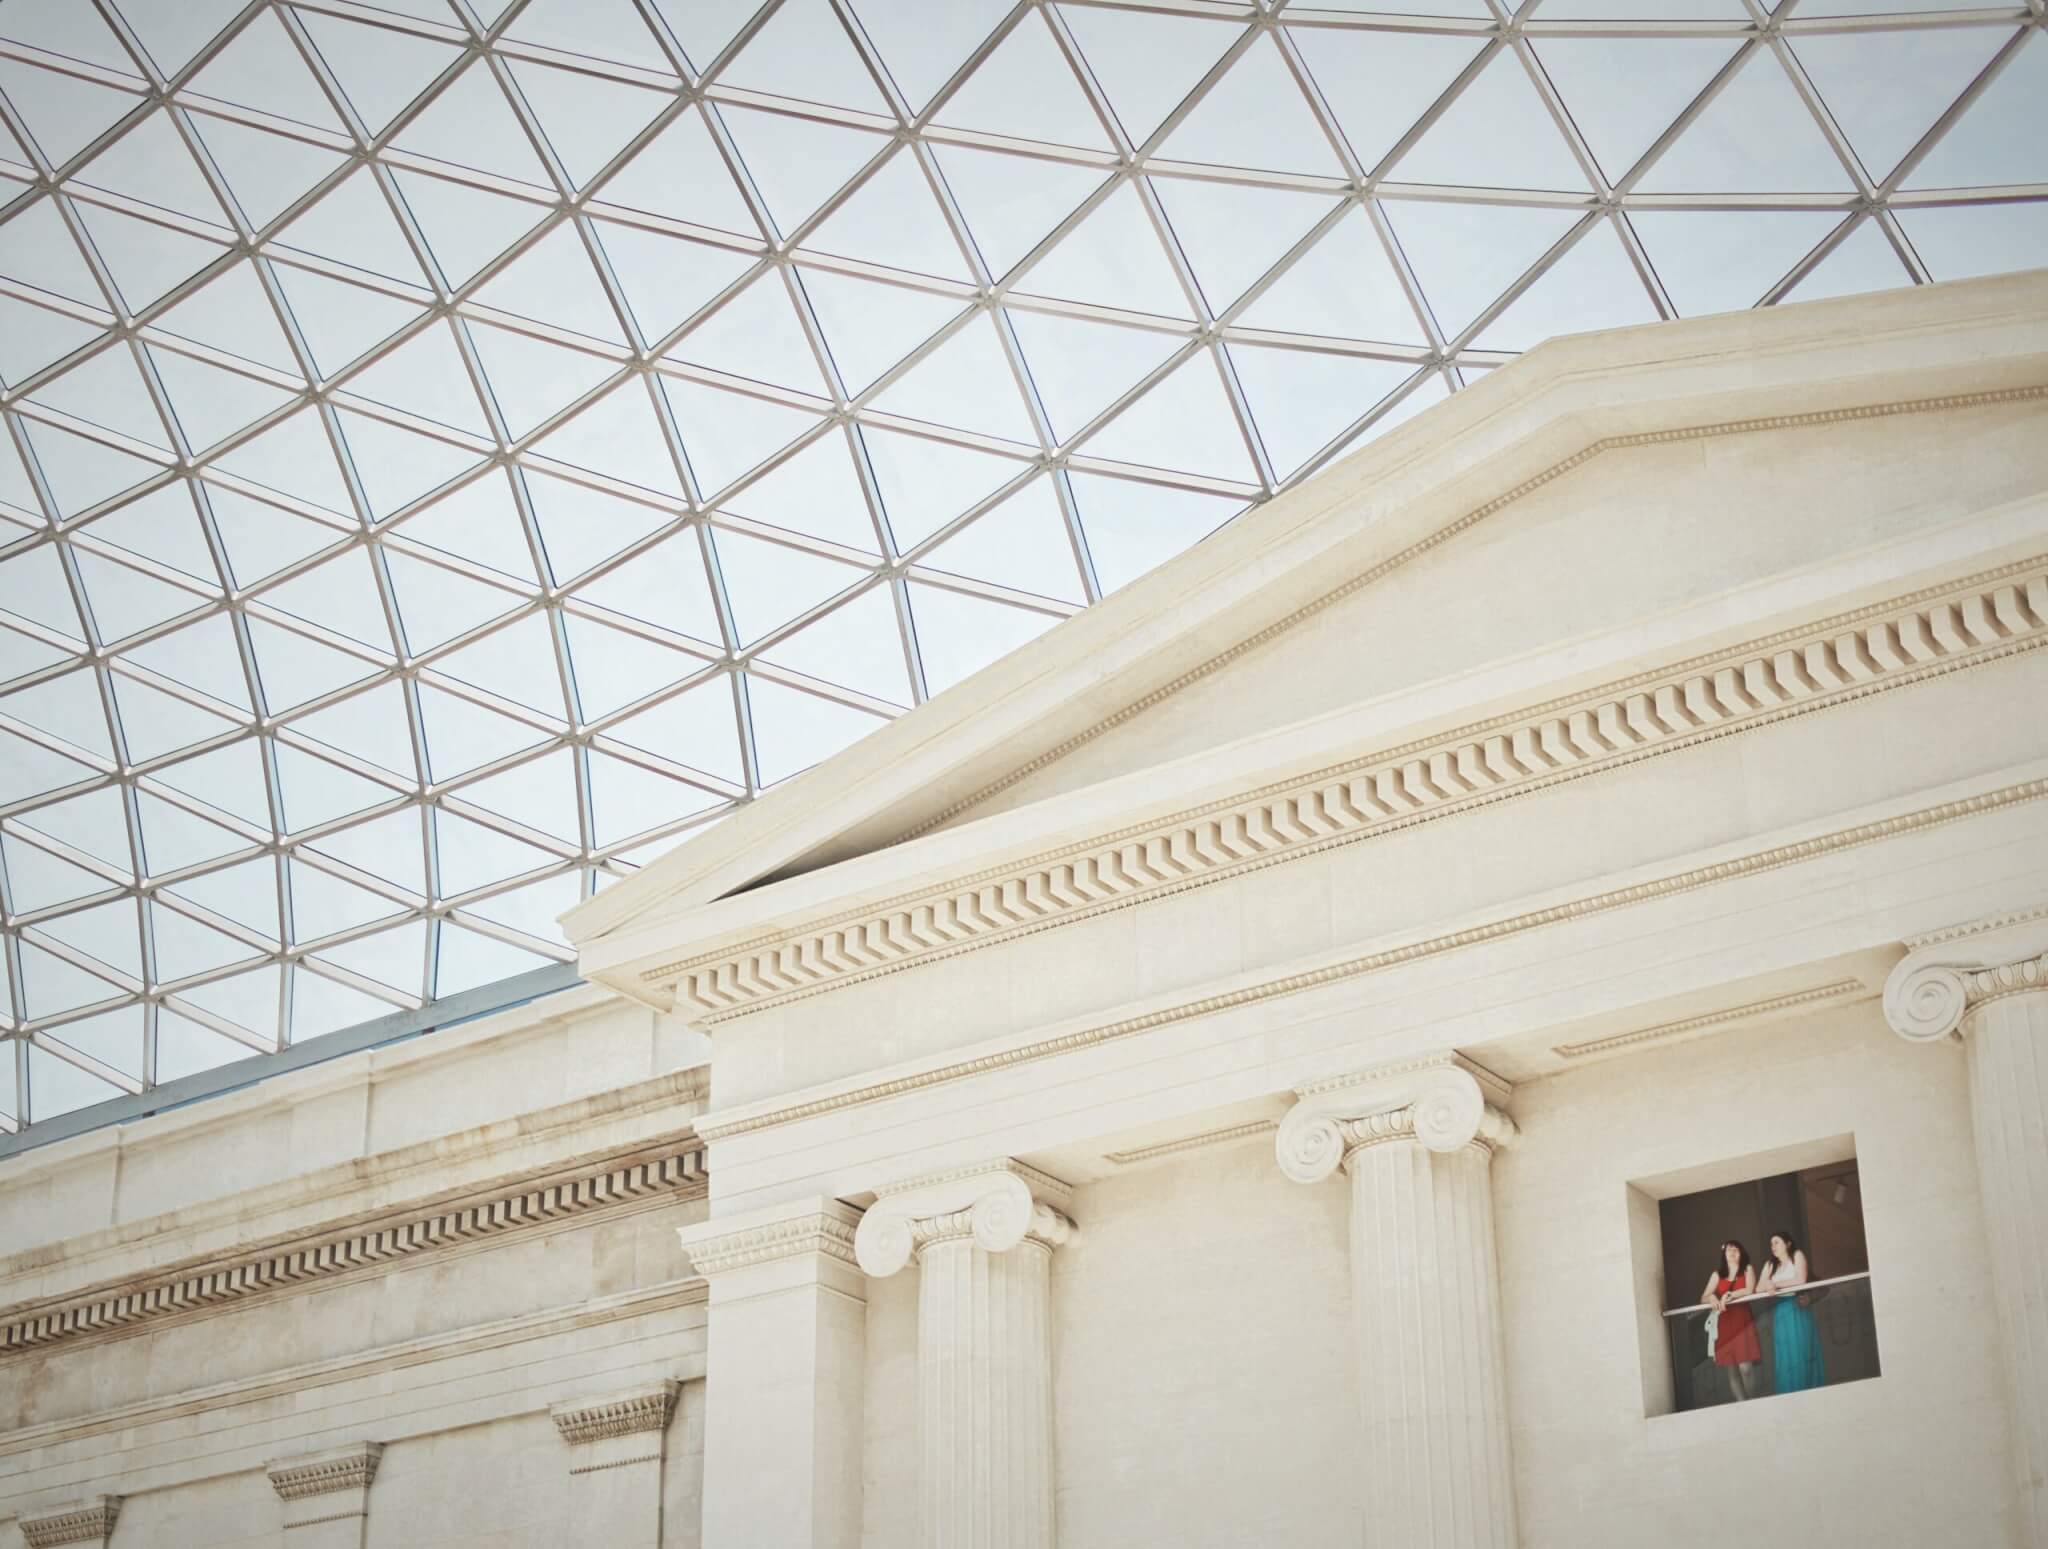 Best Free Museums in London